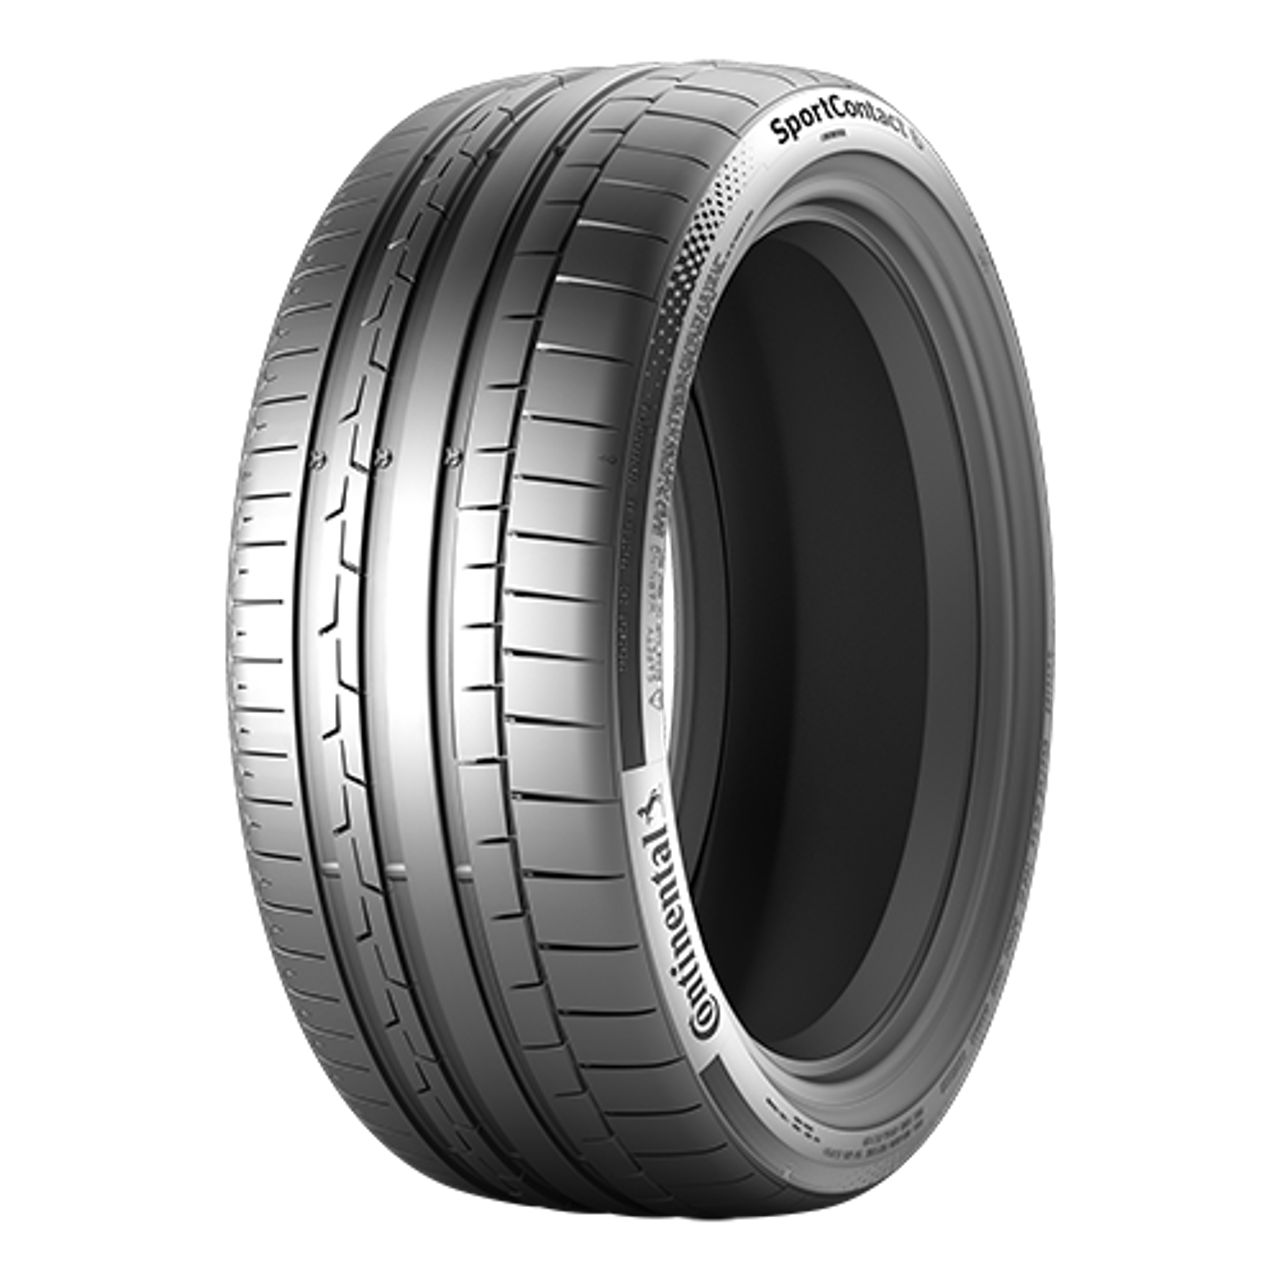 CONTINENTAL SPORTCONTACT 6 (MO-S) (EVc) 275/45R21 107Y CONTISILENT FR